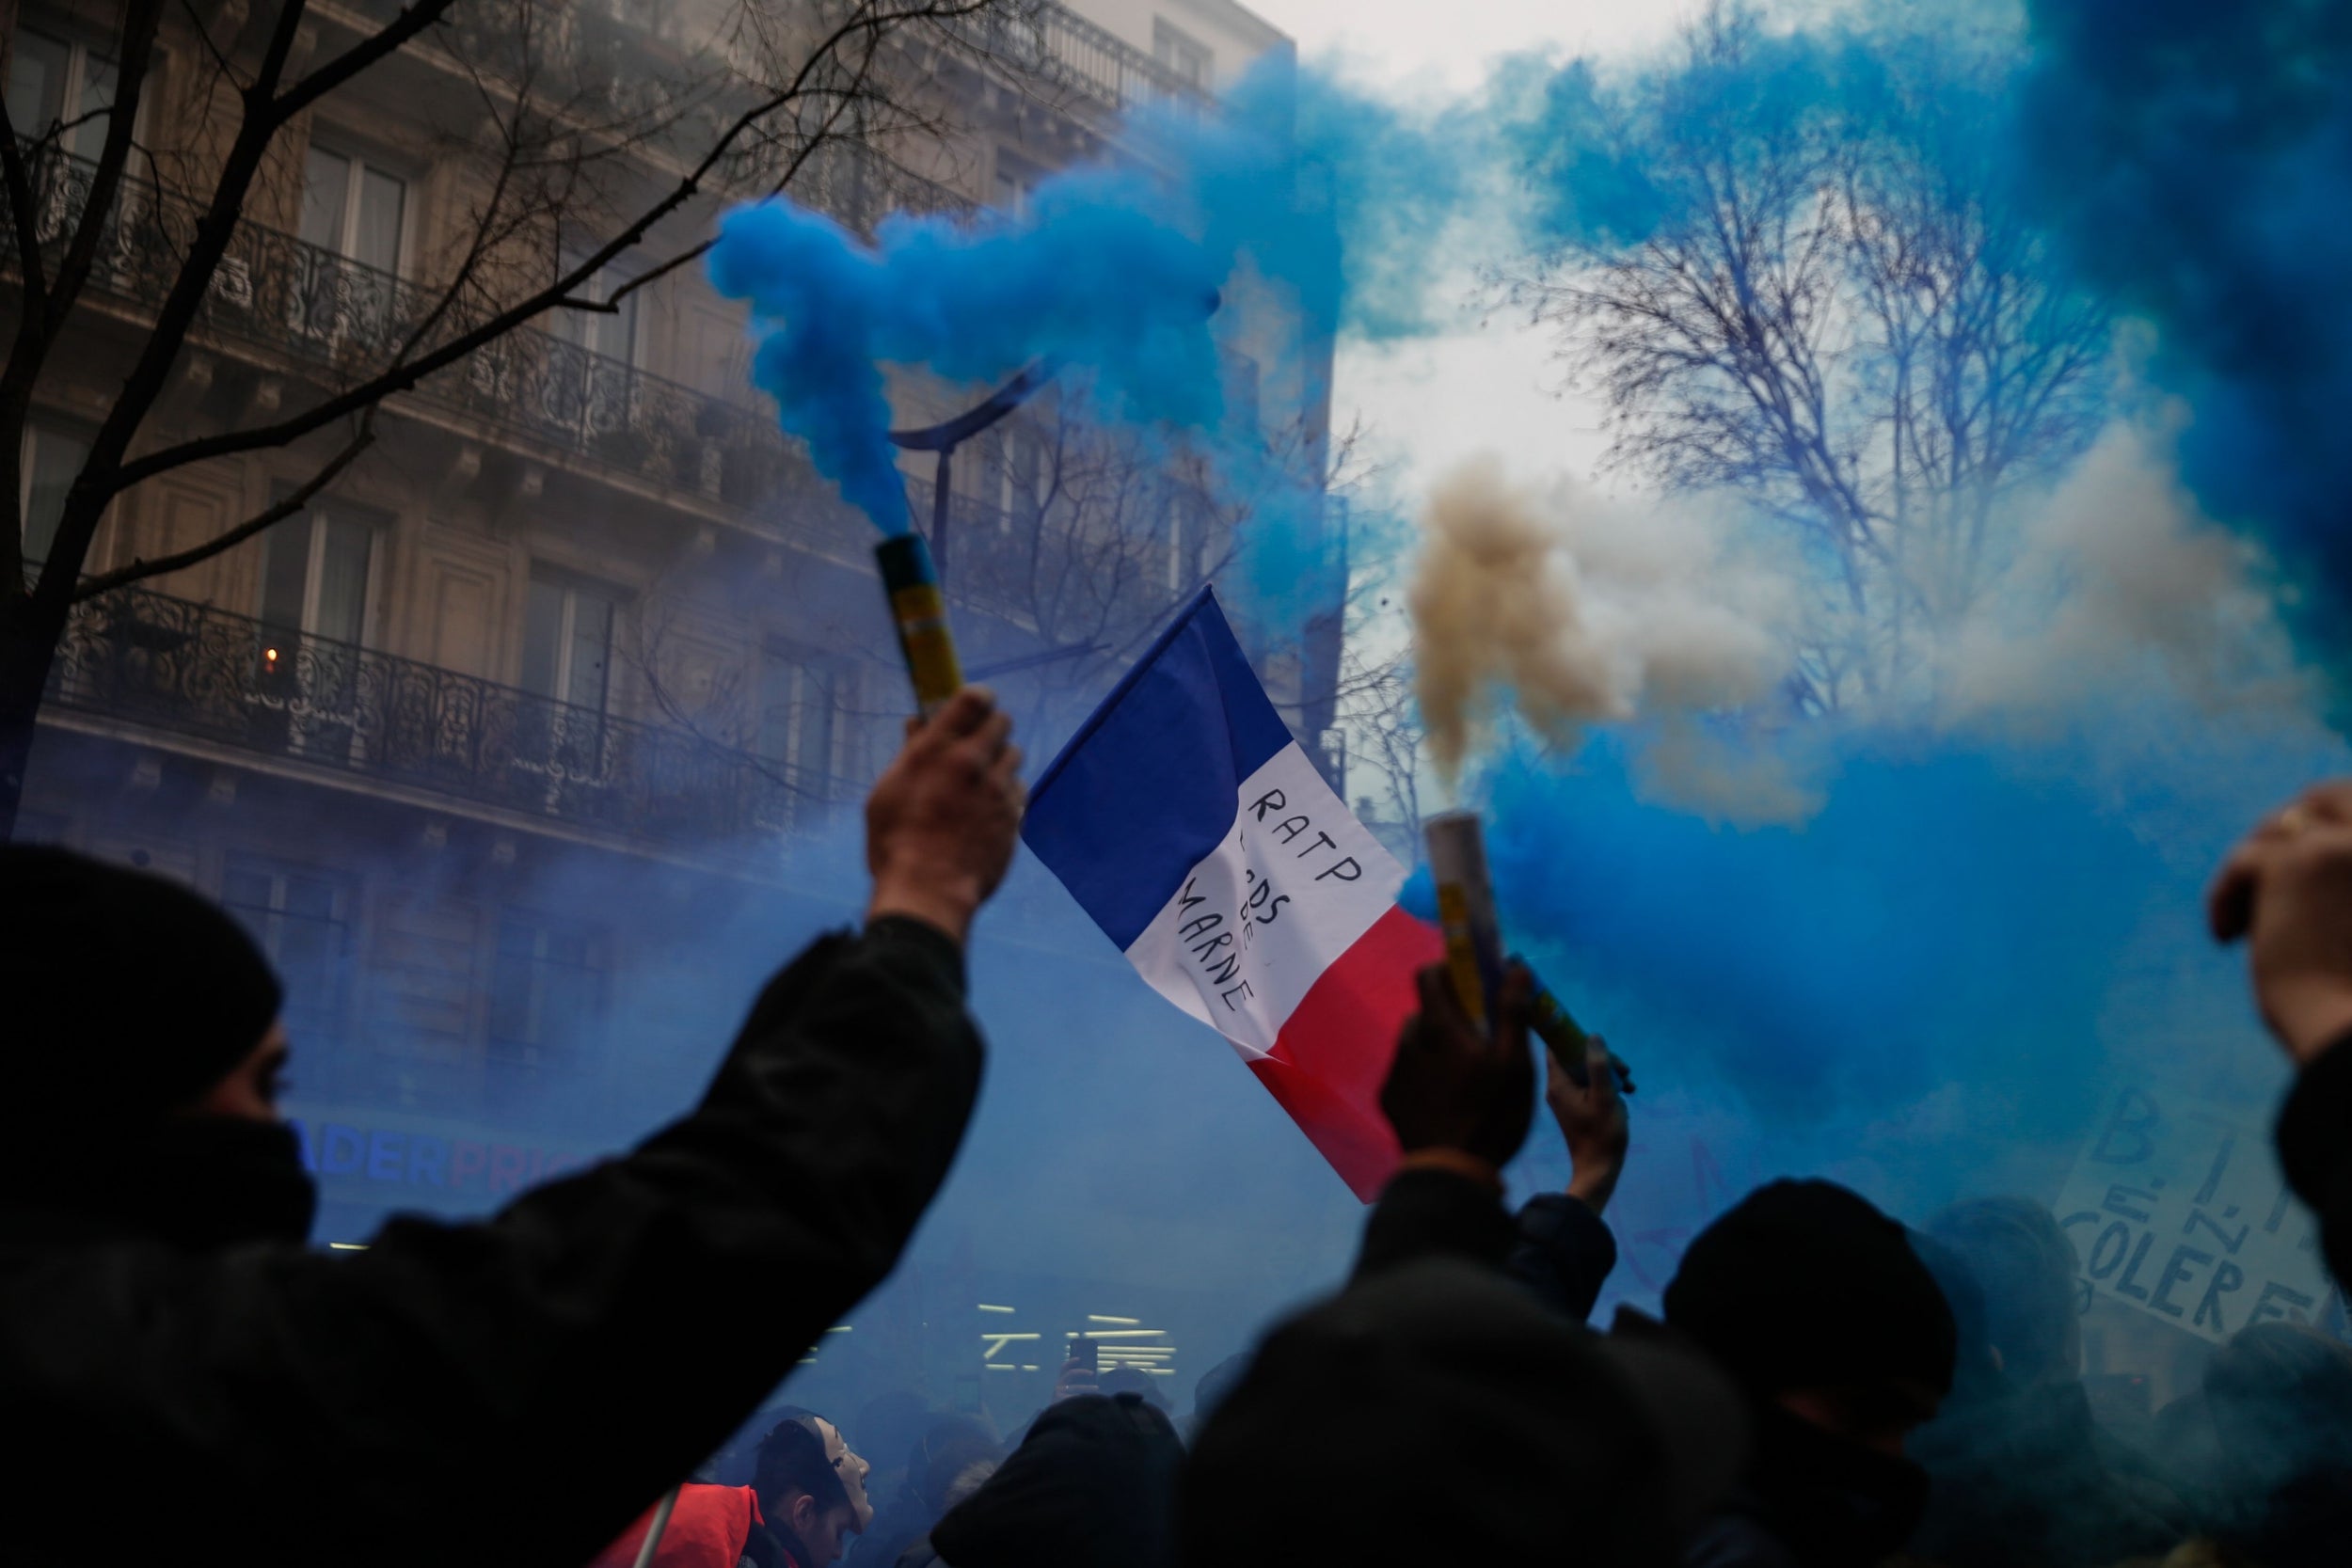 Protesters burn blue flares and wave flags during a demonstration in Paris